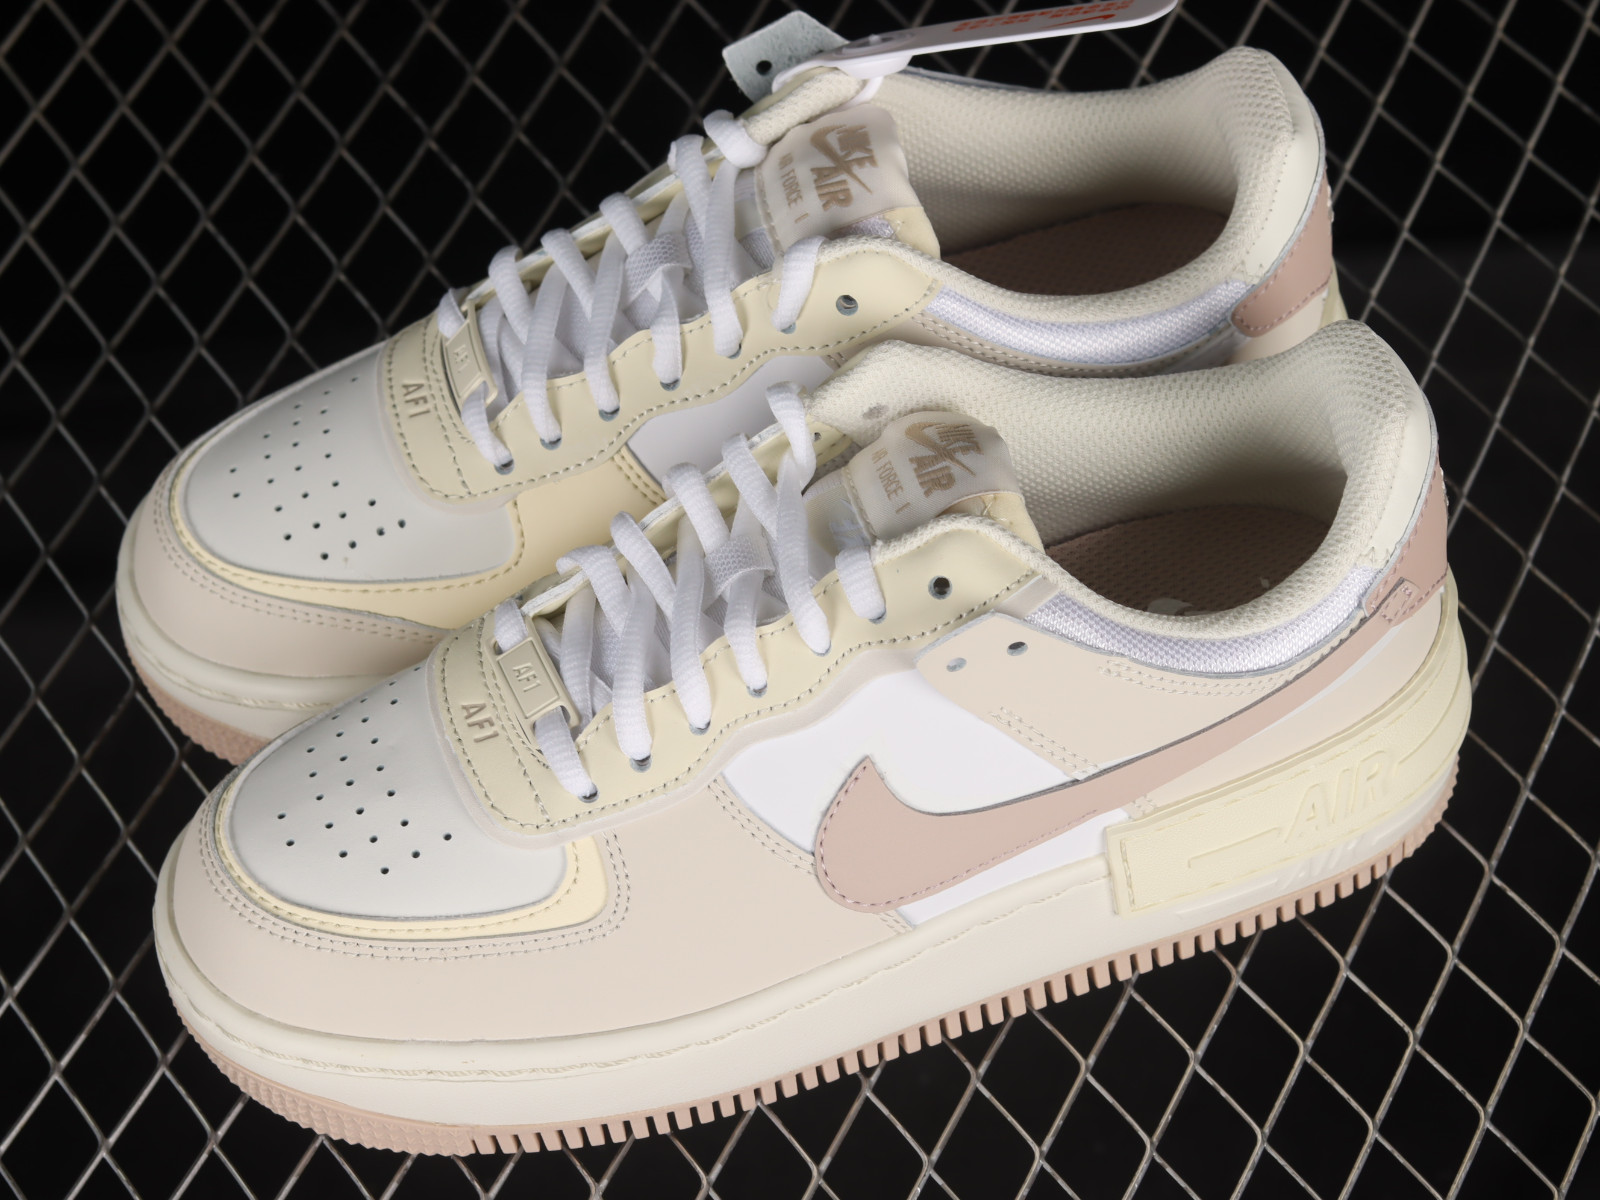 121 MultiscaleconsultingShops - retro nike waffle trainers for sale - Nike Air Force 1 Low Shadow Cream Fossil Stone Sail FN3444